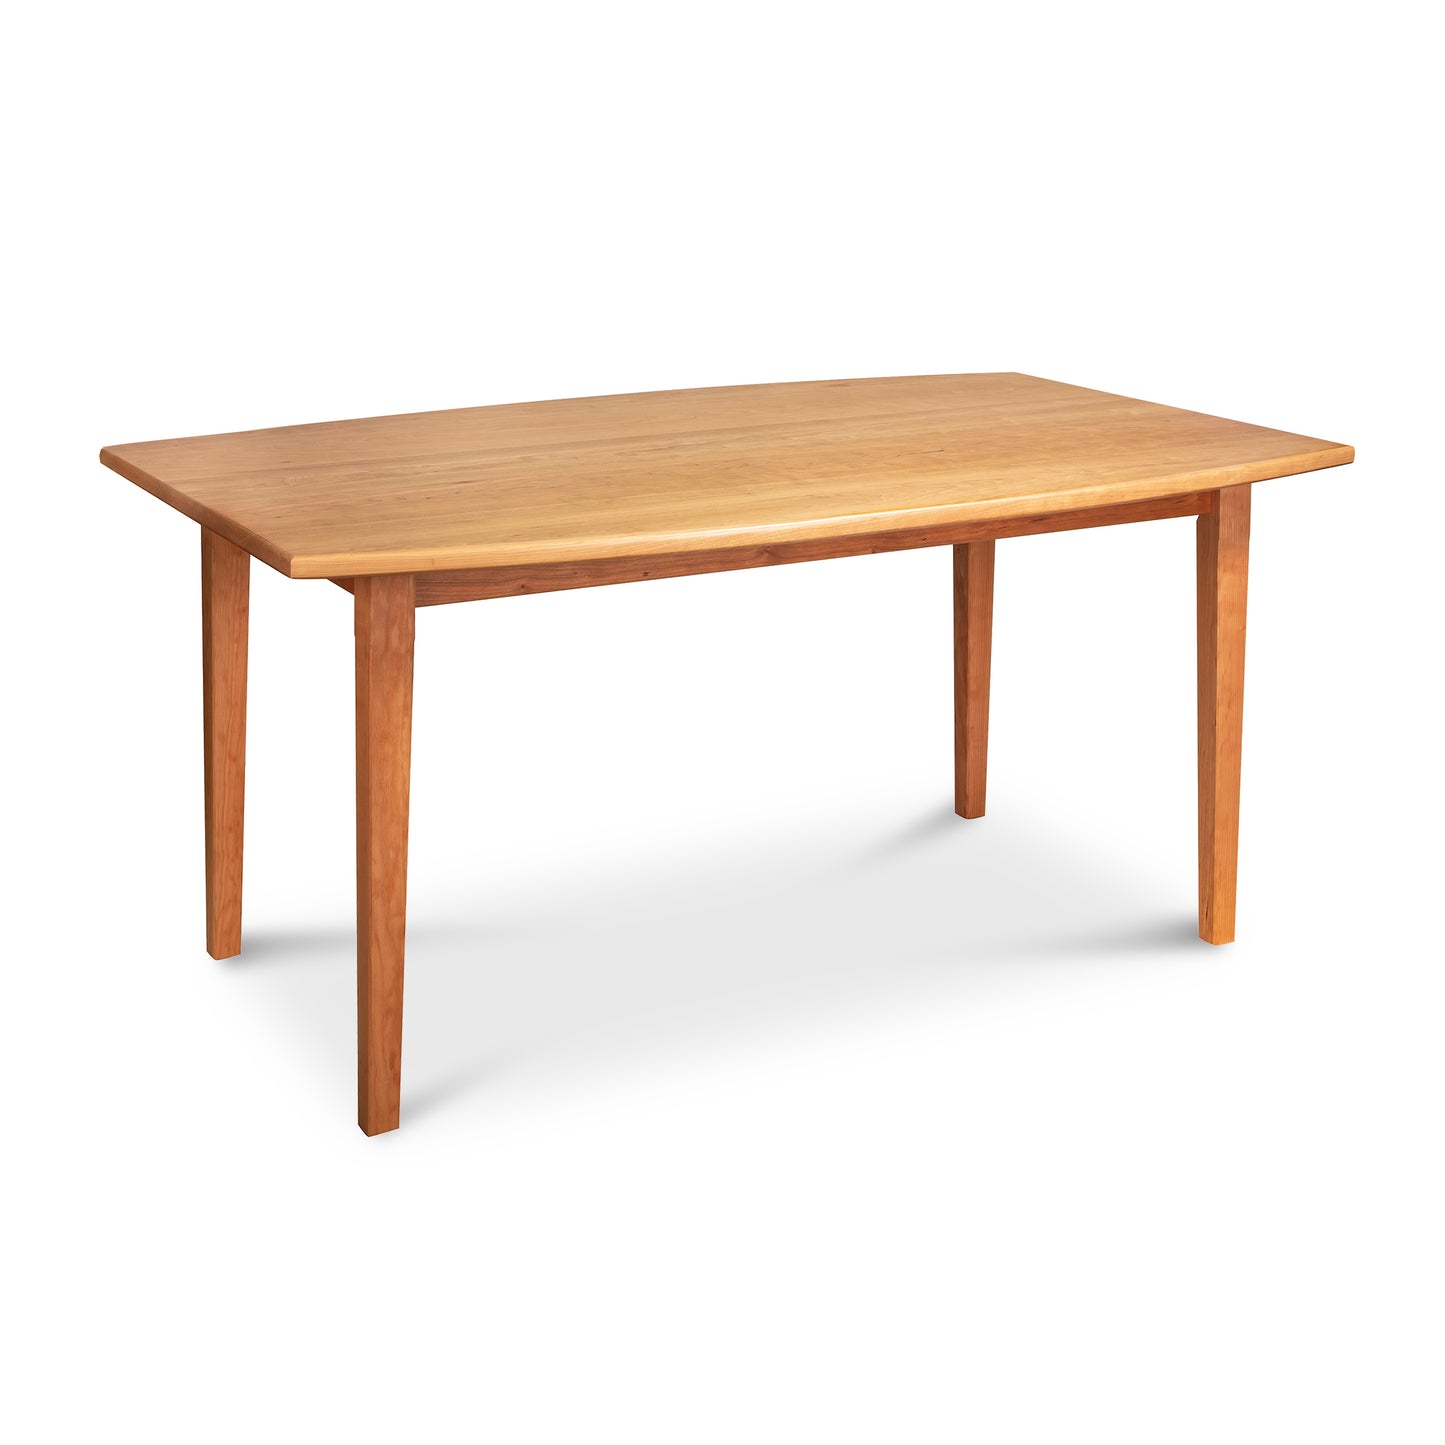 A Vermont Shaker Boat Shaped Solid Top Dining Table by Maple Corner Woodworks with a rectangular top and four legs, isolated on a white background.